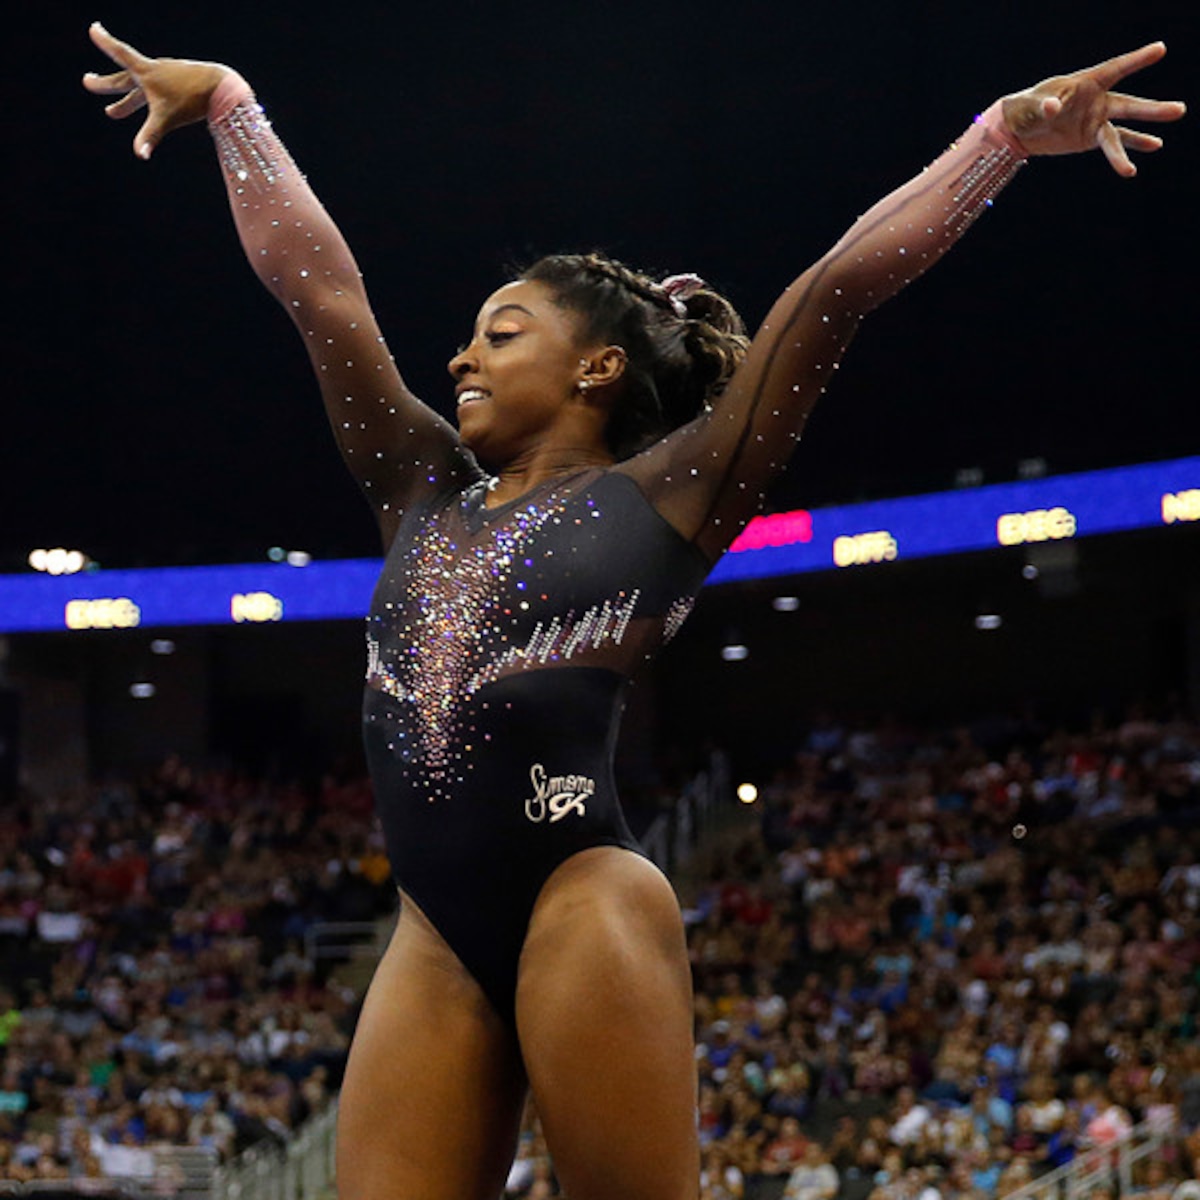 Simone Biles Makes History Again With Her Must Watch Floor